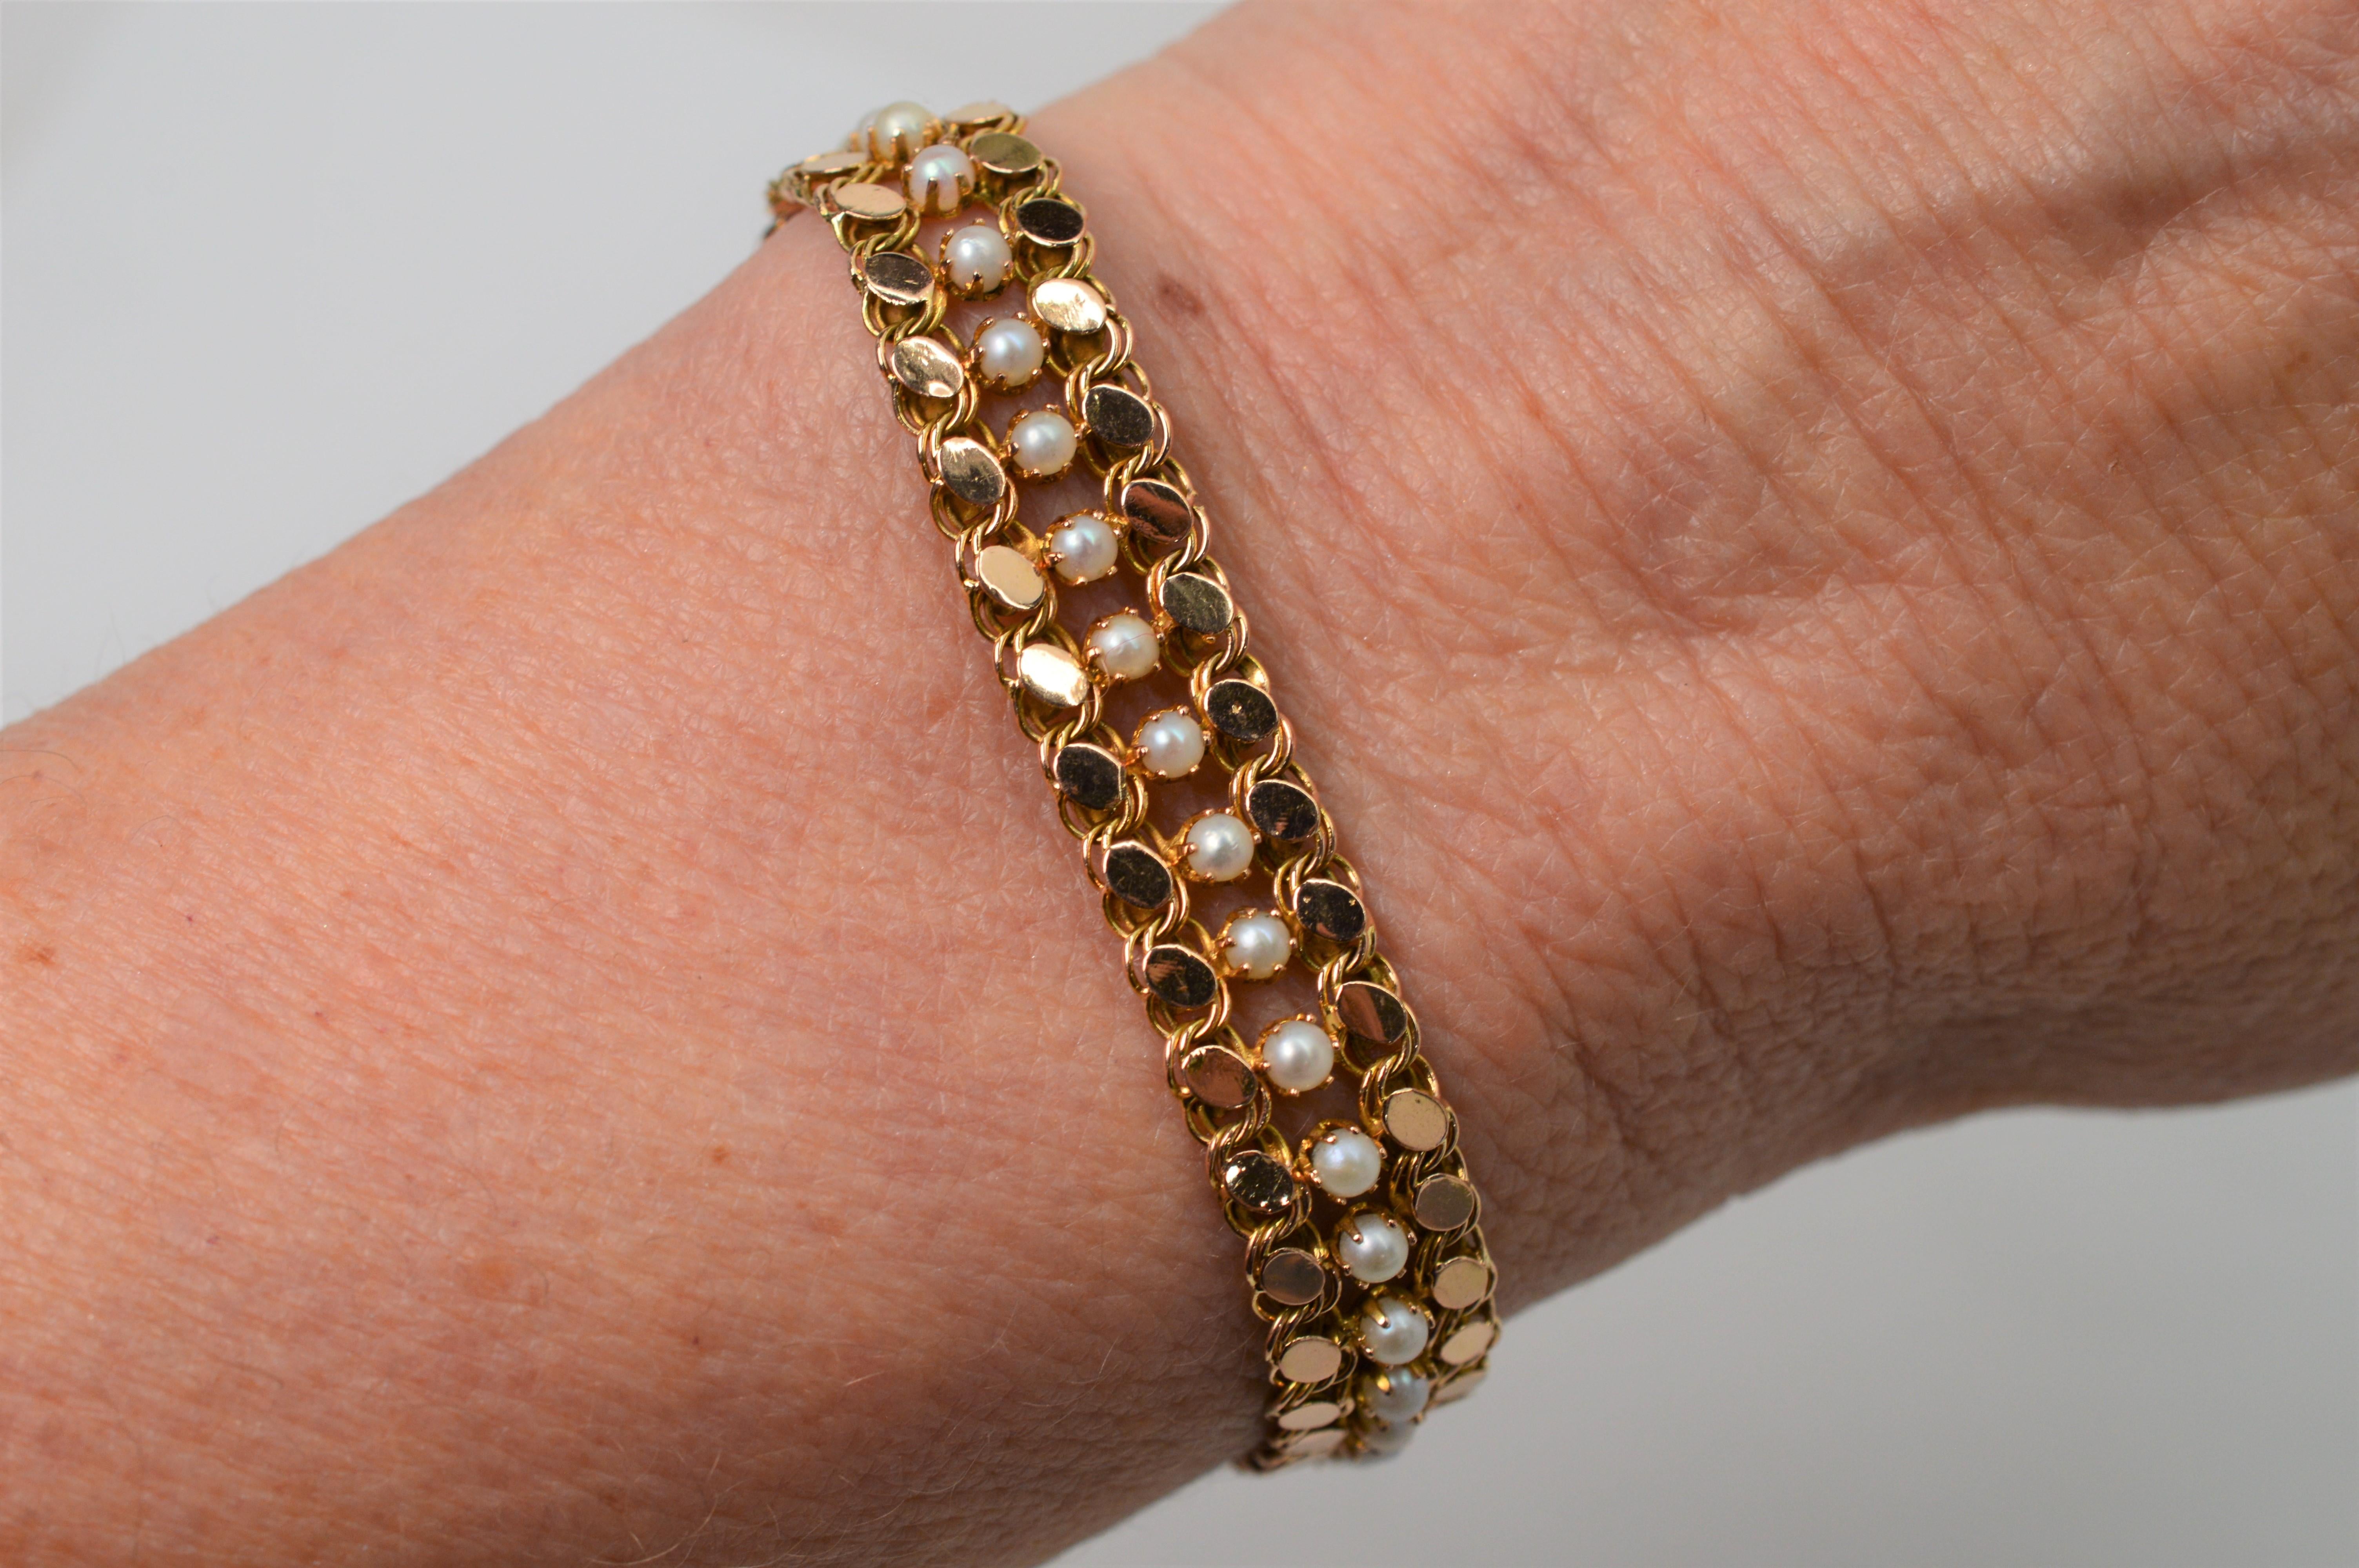 Fluid elegance with timeless style achieved through intricate links of bright 14k fourteen karat yellow gold each adorned with bezel set petite round white pearls placed within the center of each link.  Effortlessly draping the wrist, this bracelet